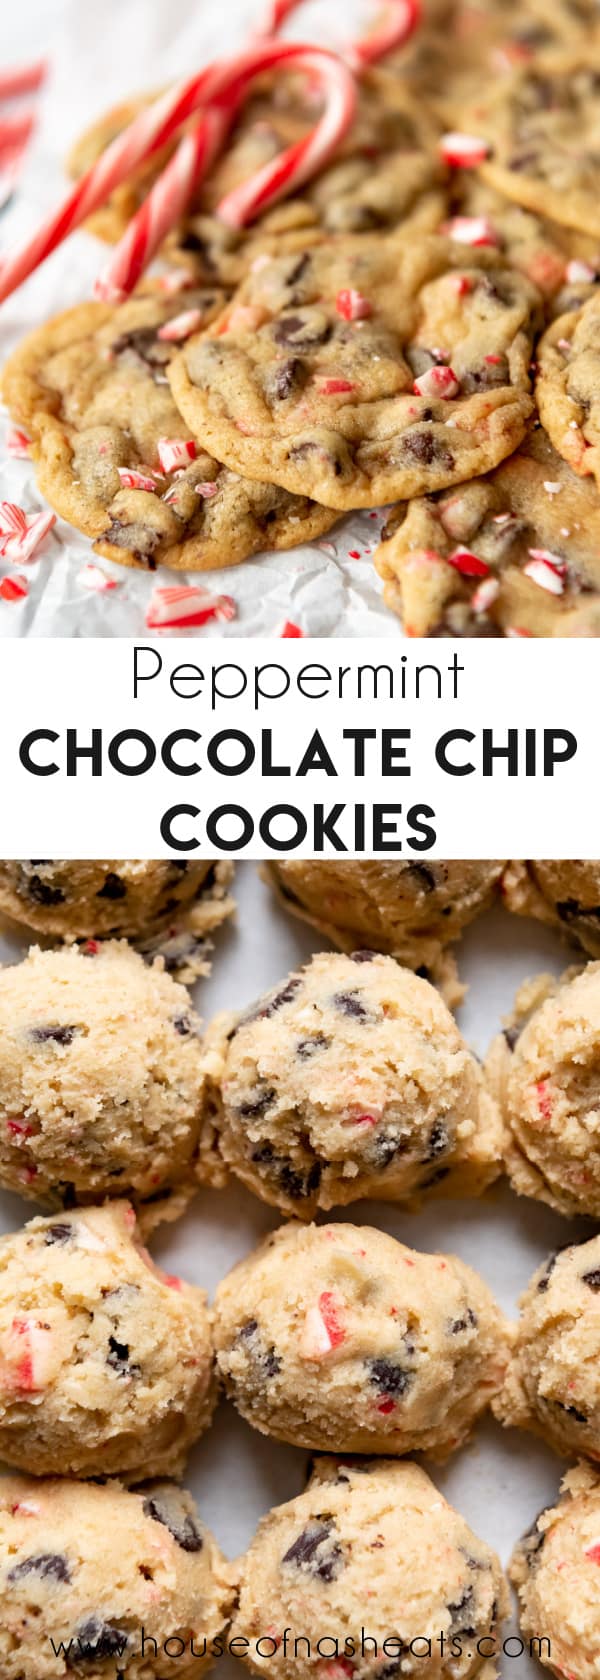 A collage of peppermint chocolate chip cookies and cookie dough with text overlay.